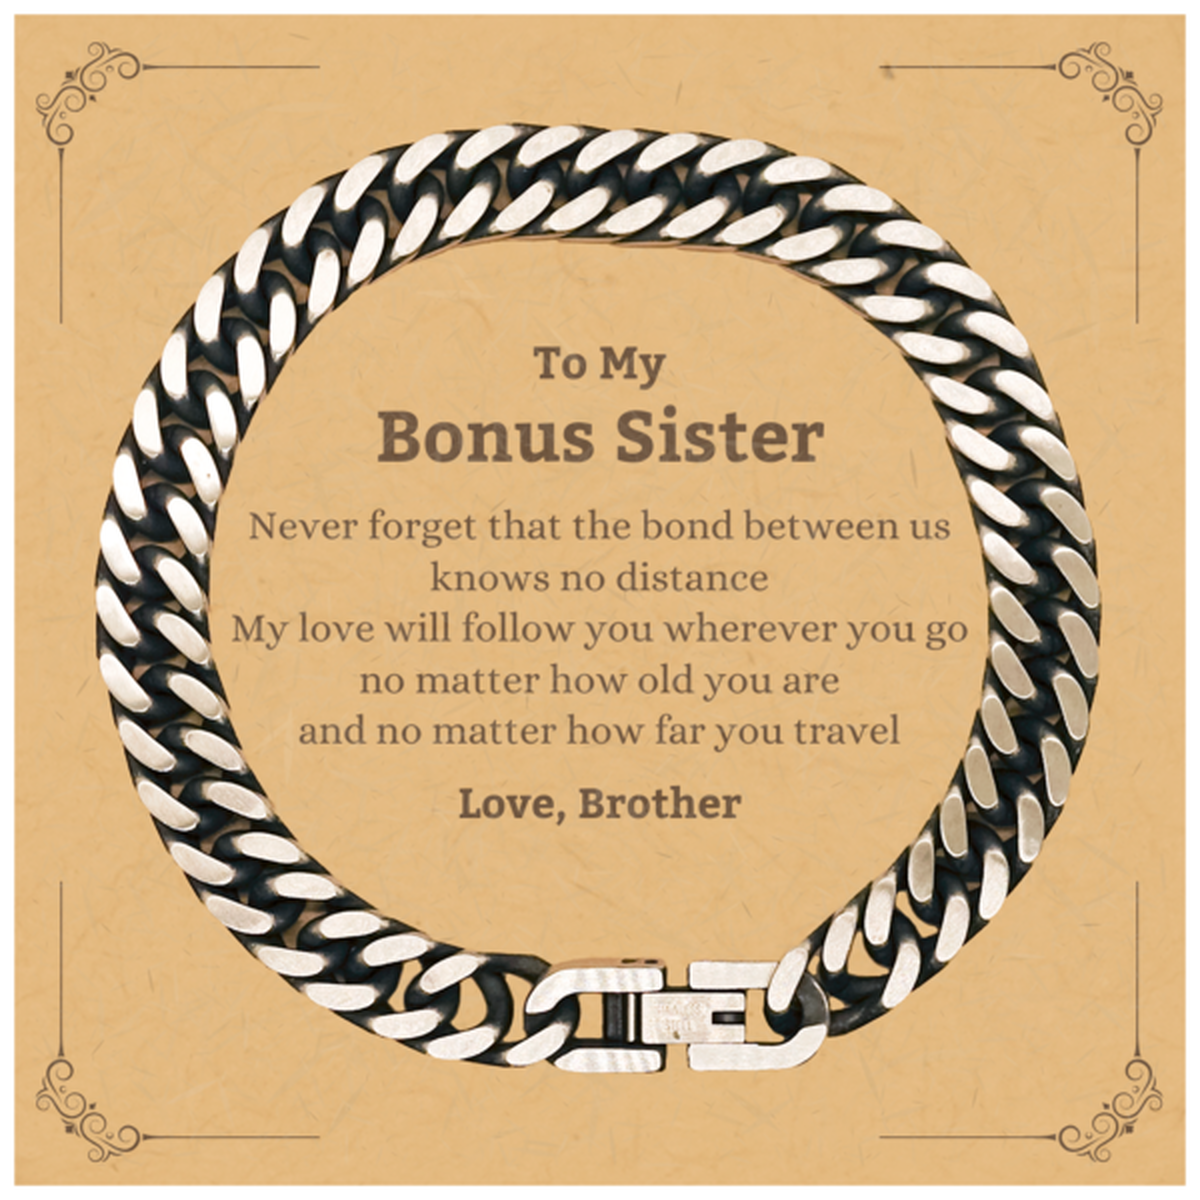 Bonus Sister Birthday Gifts from Brother, Adjustable Cuban Link Chain Bracelet for Bonus Sister Christmas Graduation Unique Gifts Bonus Sister Never forget that the bond between us knows no distance. Love, Brother